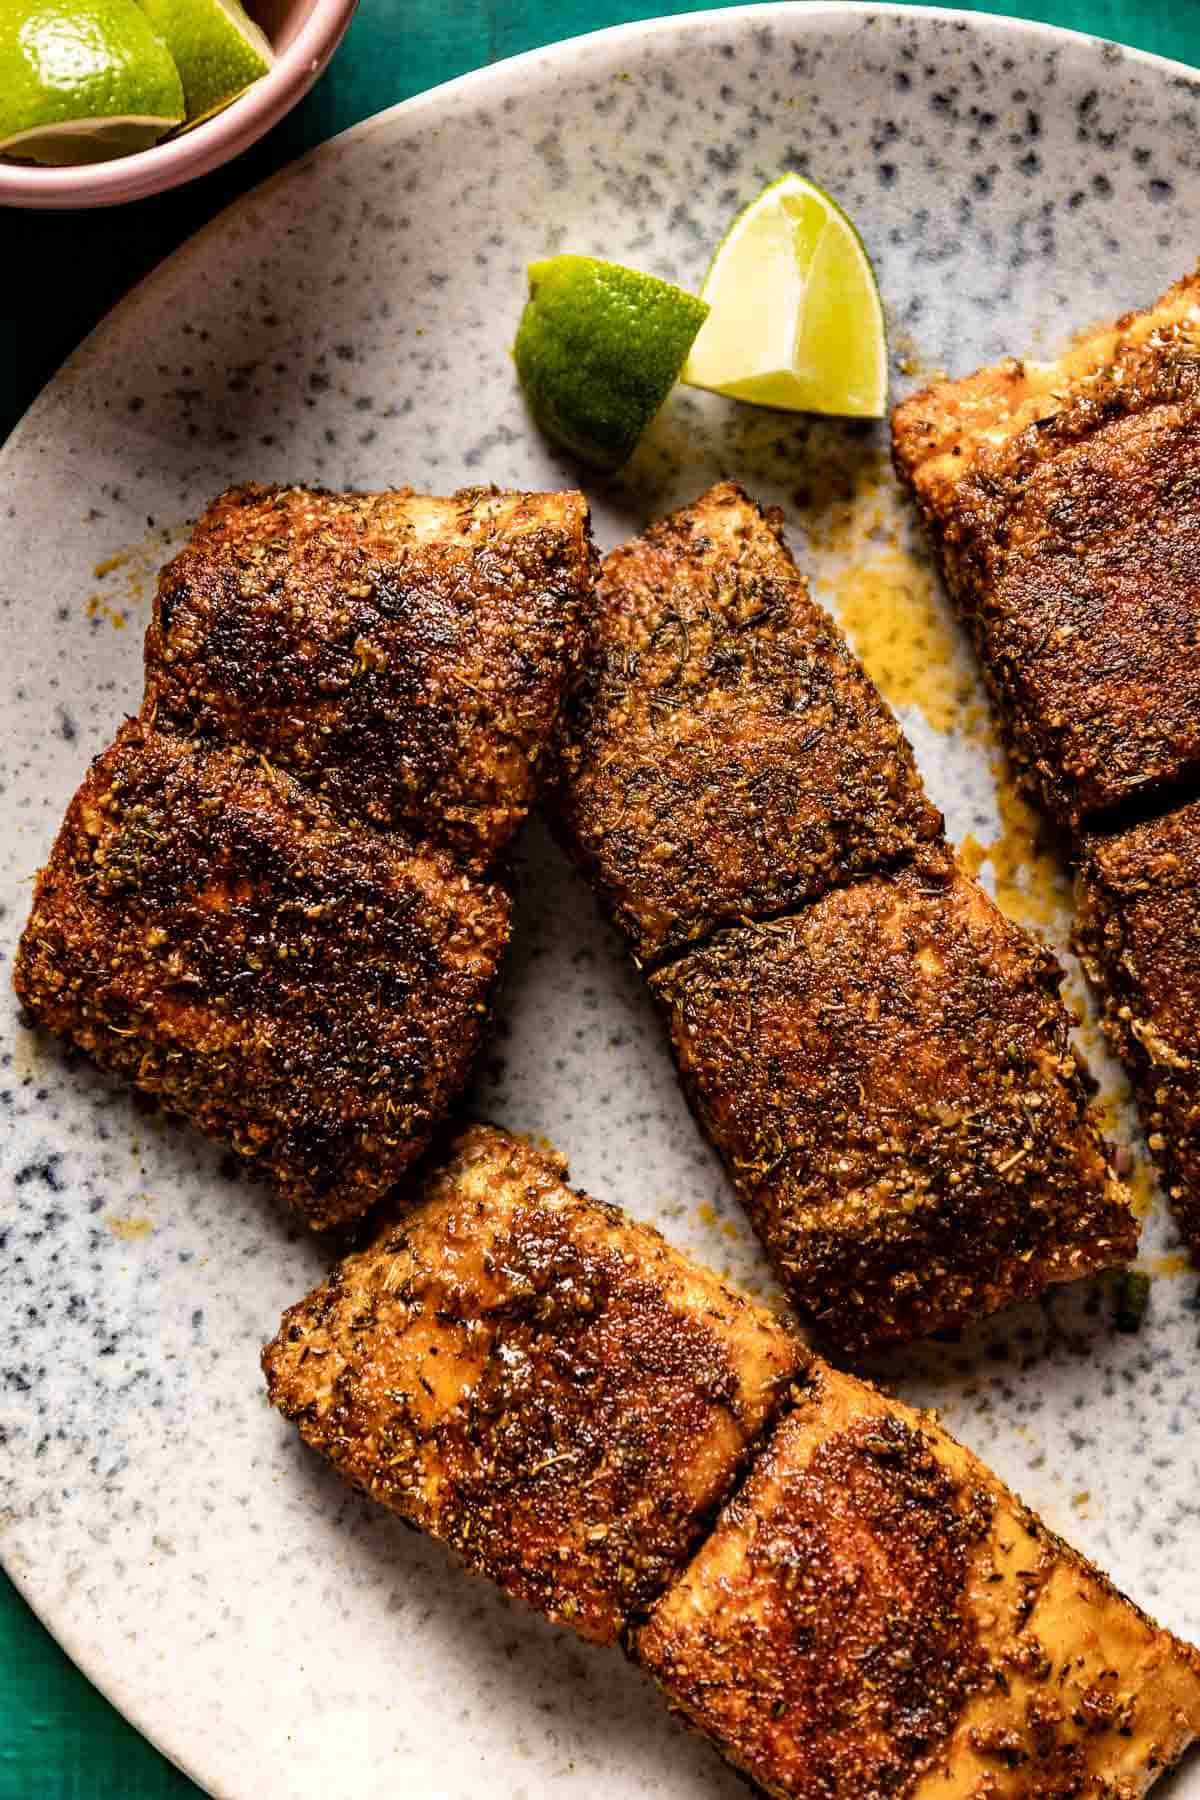 Fish coated with blackened spice mix on a plate from the top view.